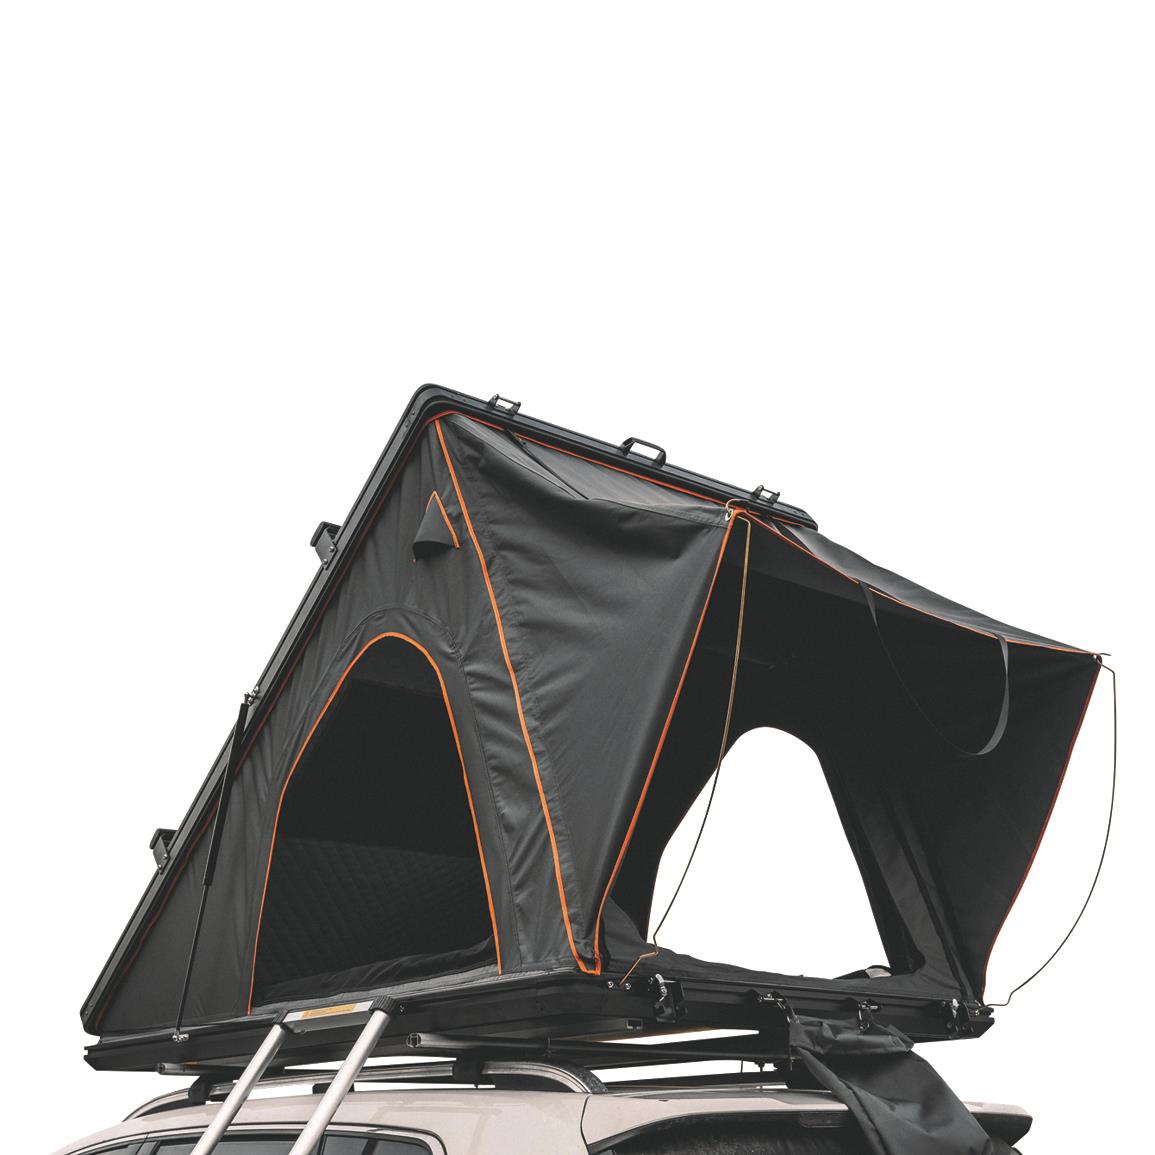 Trustmade Scout Plus Hard Shell Rooftop Tent with Roof Rack, Black/gray